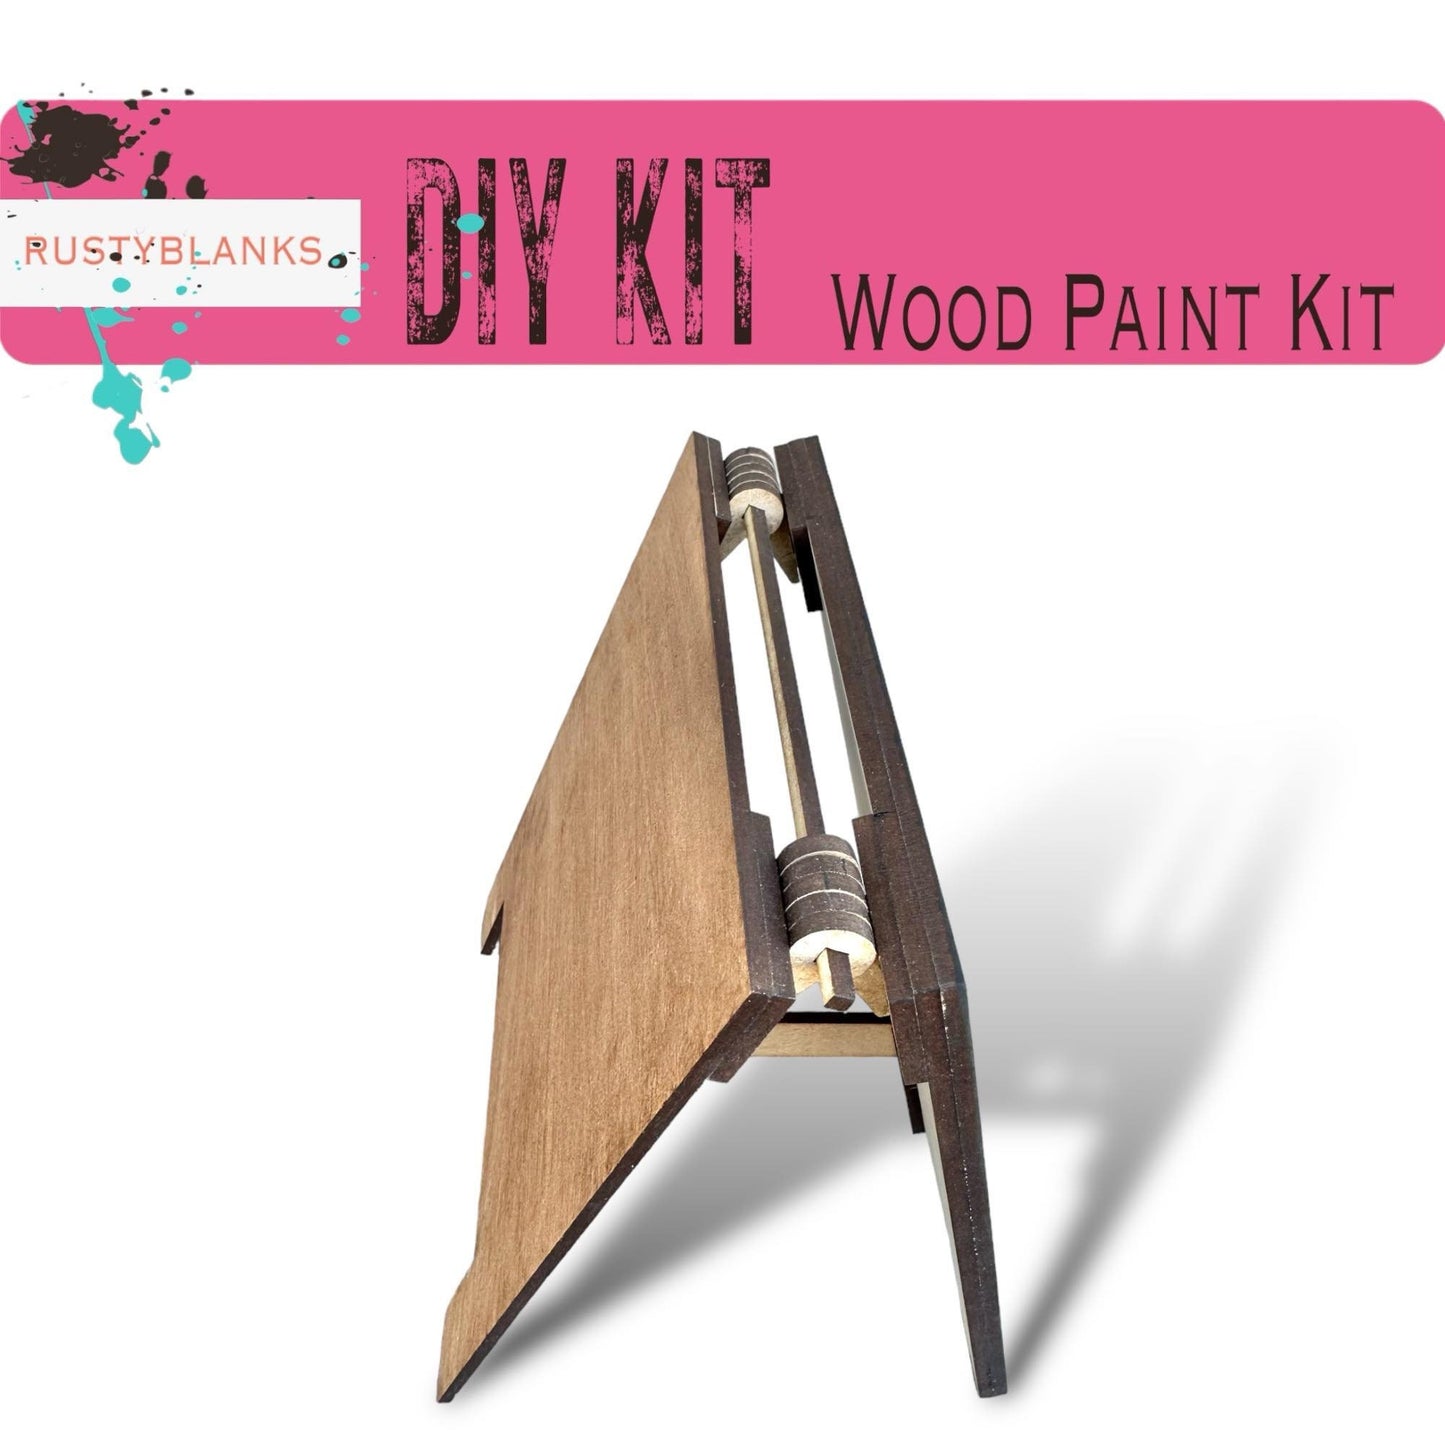 a wooden paint kit with a pink background